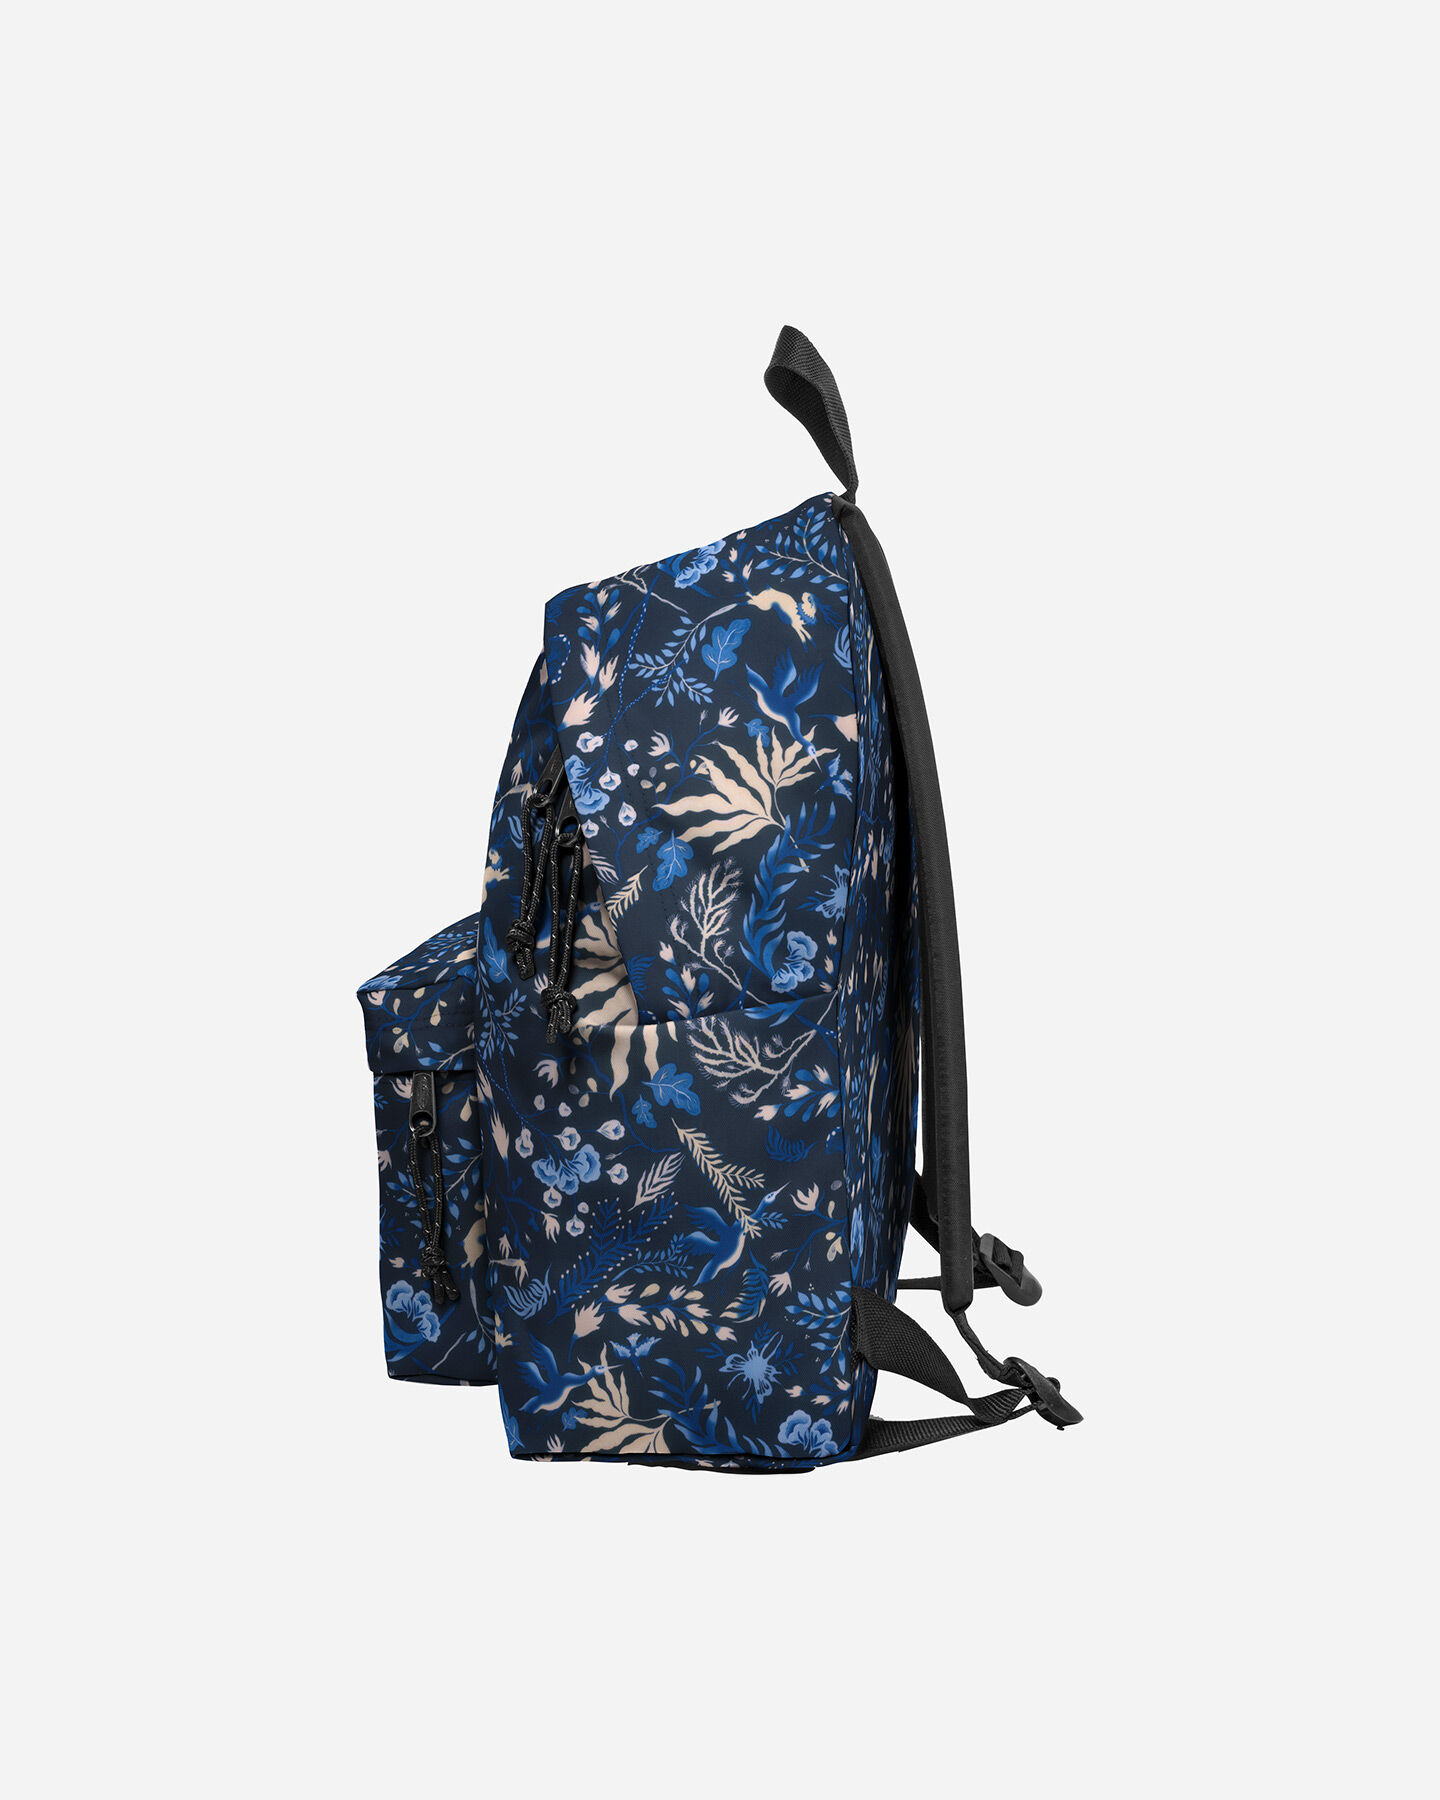  Zaino EASTPAK PADDED PAK'R WHIMSICAL  S5503858|W91|OS scatto 2